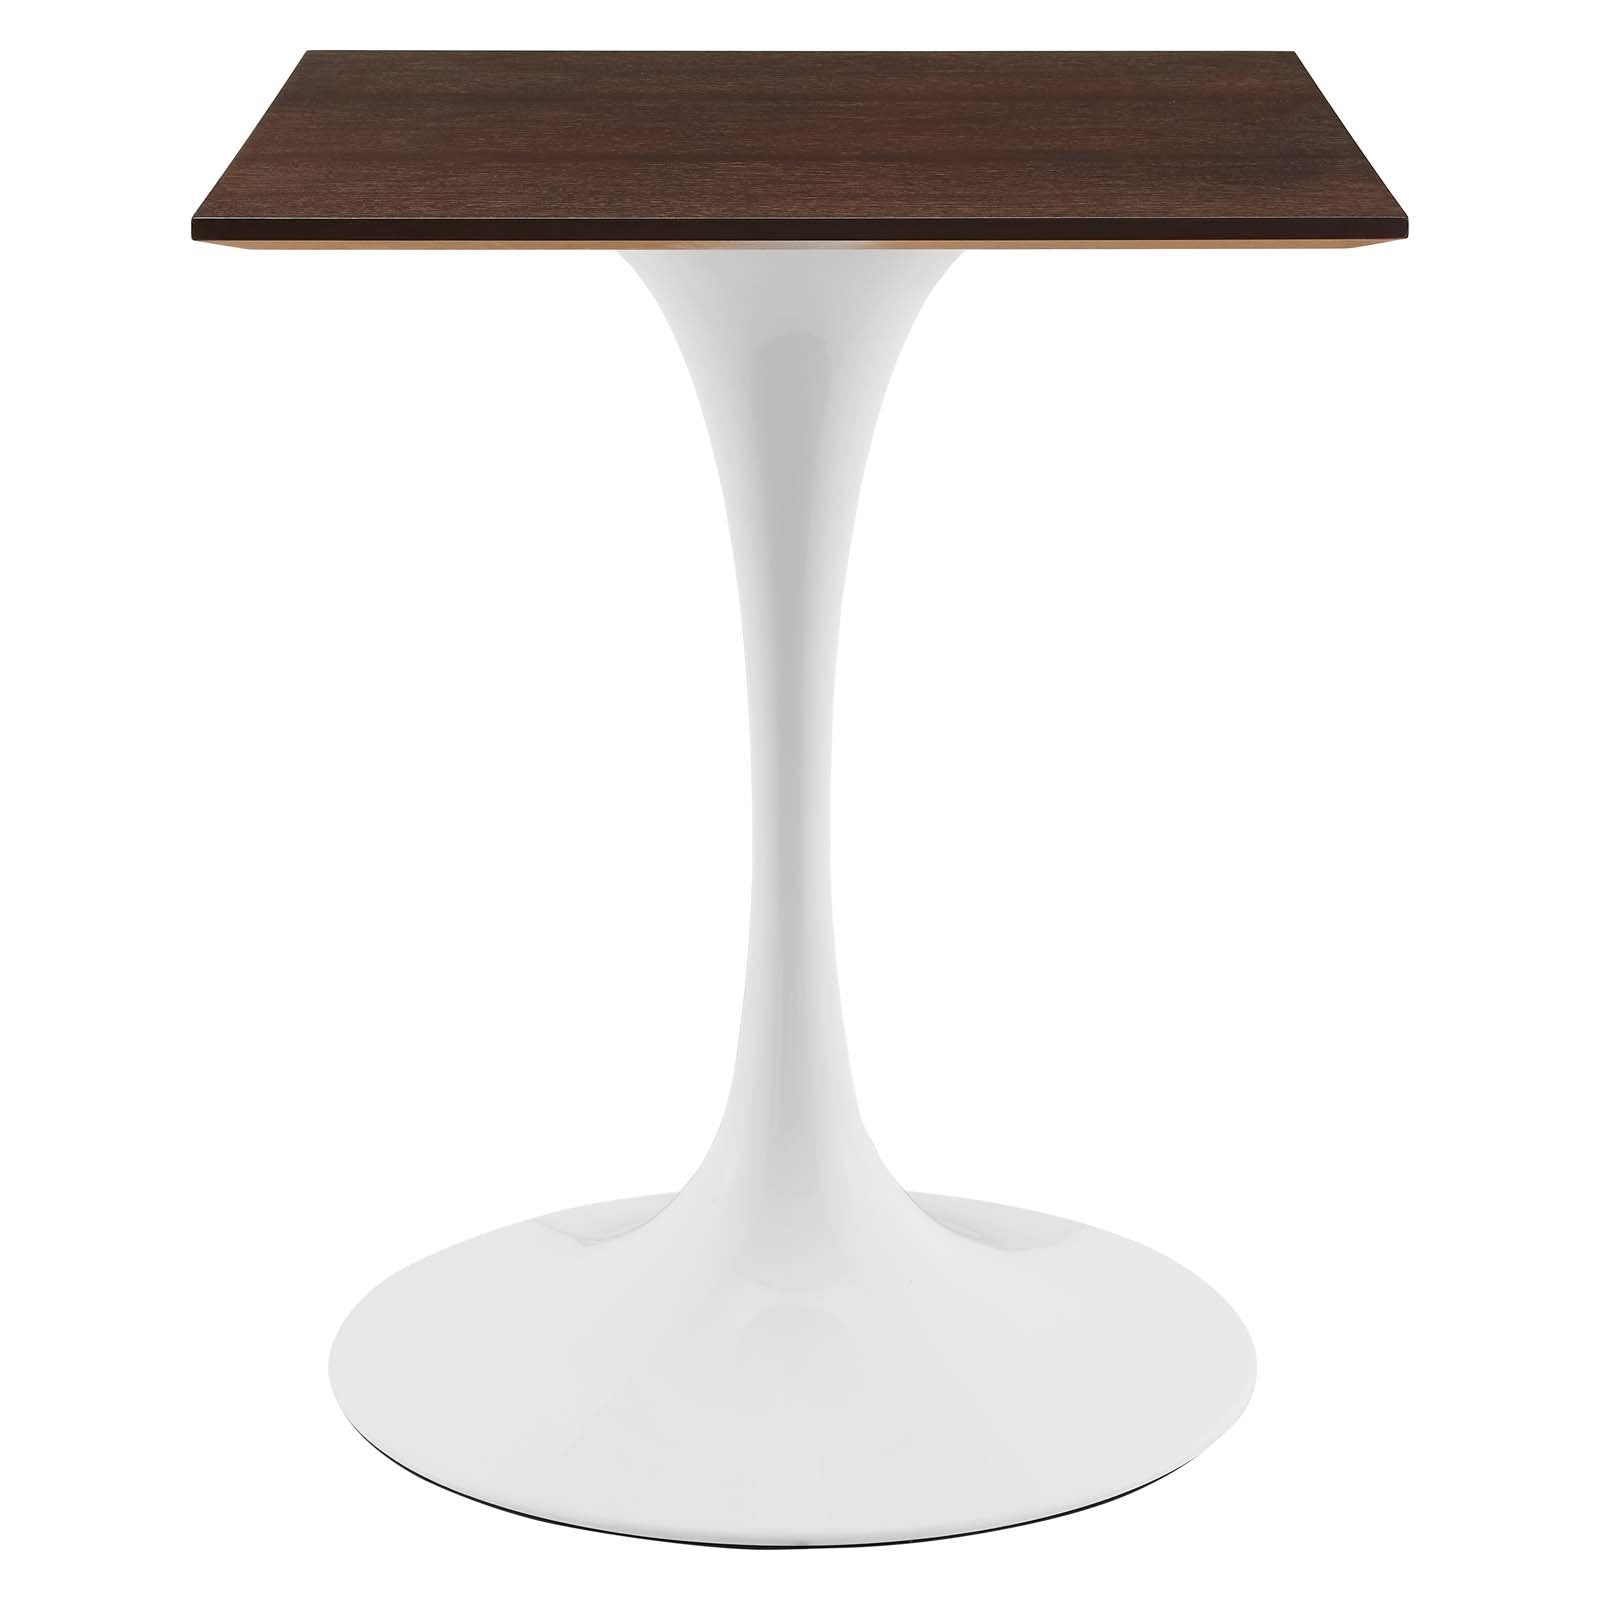 Lippa 24" Square Dining Table - East Shore Modern Home Furnishings